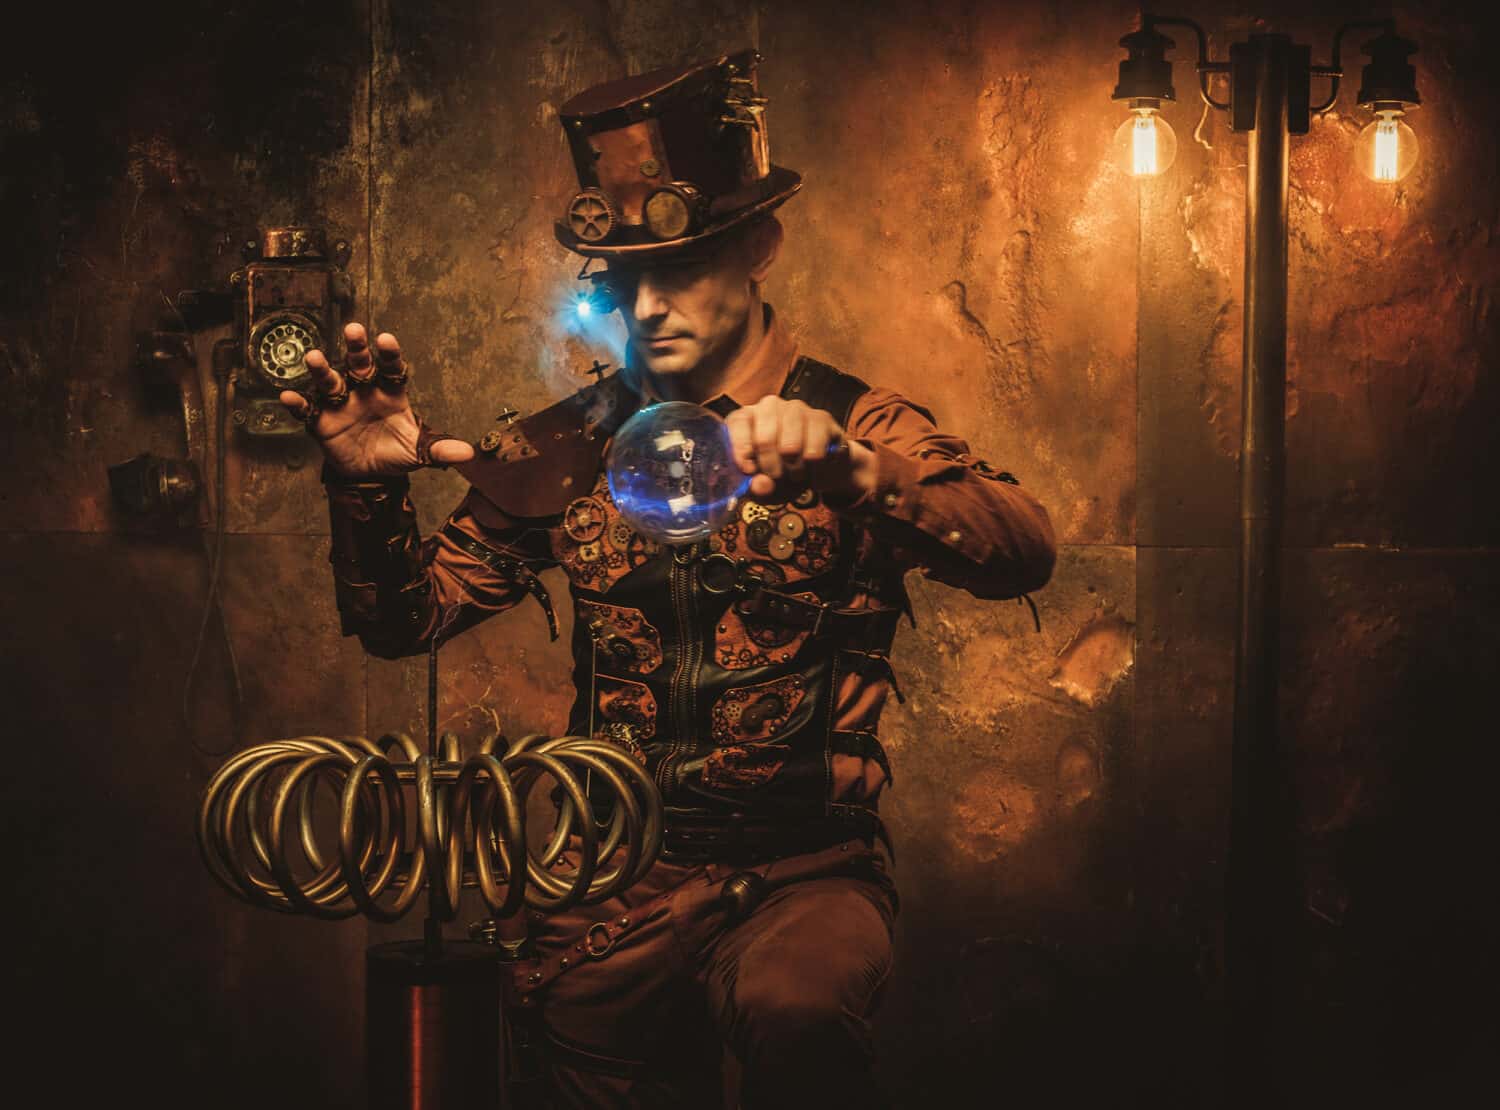 A man in a steampunk costume with a glowing orb - Steampunk